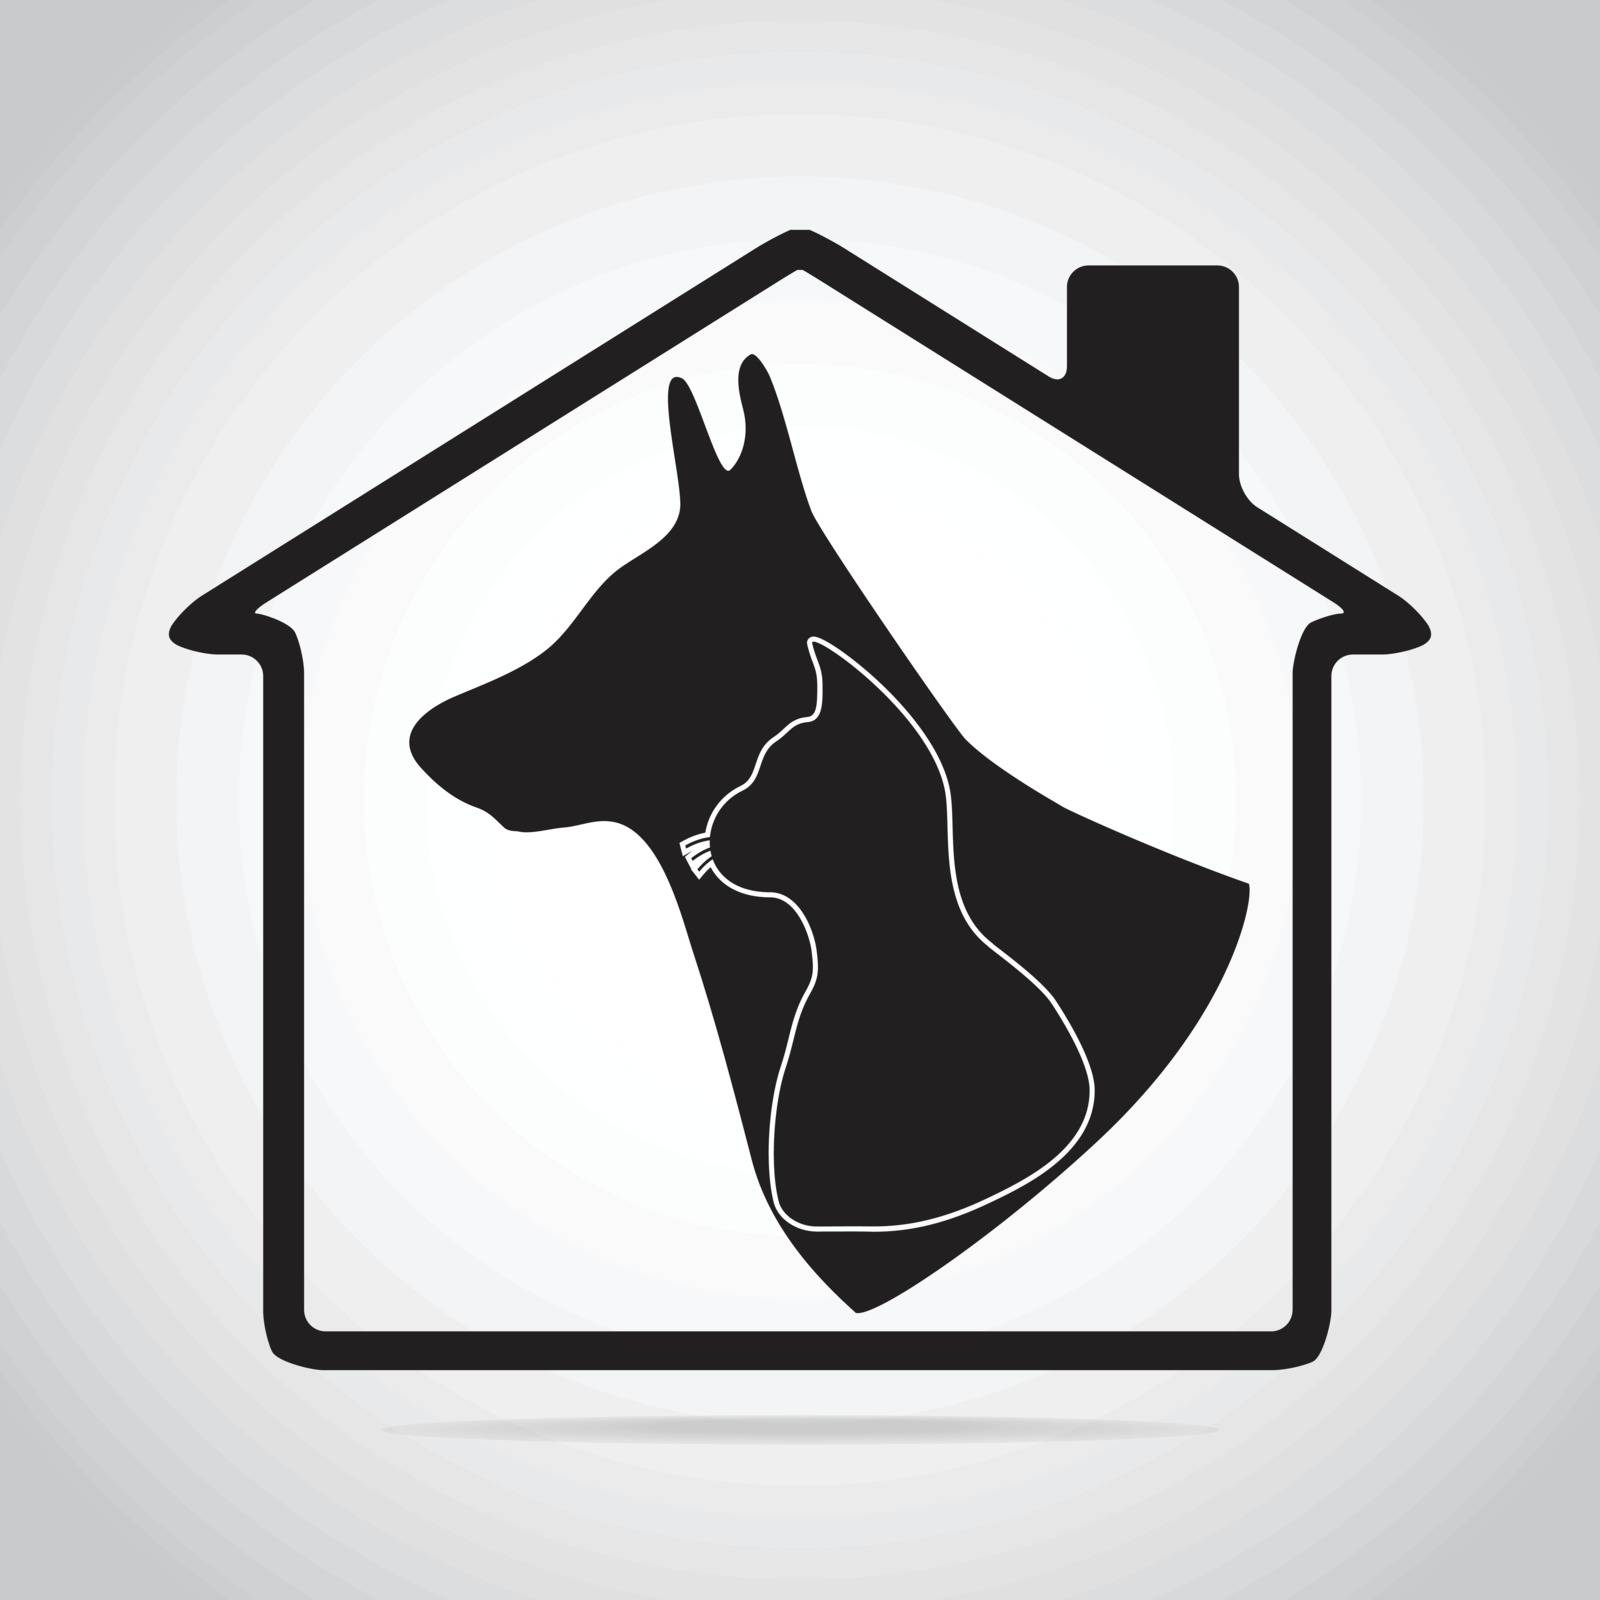 Pet home icon, animal house icon illustration by Kheat